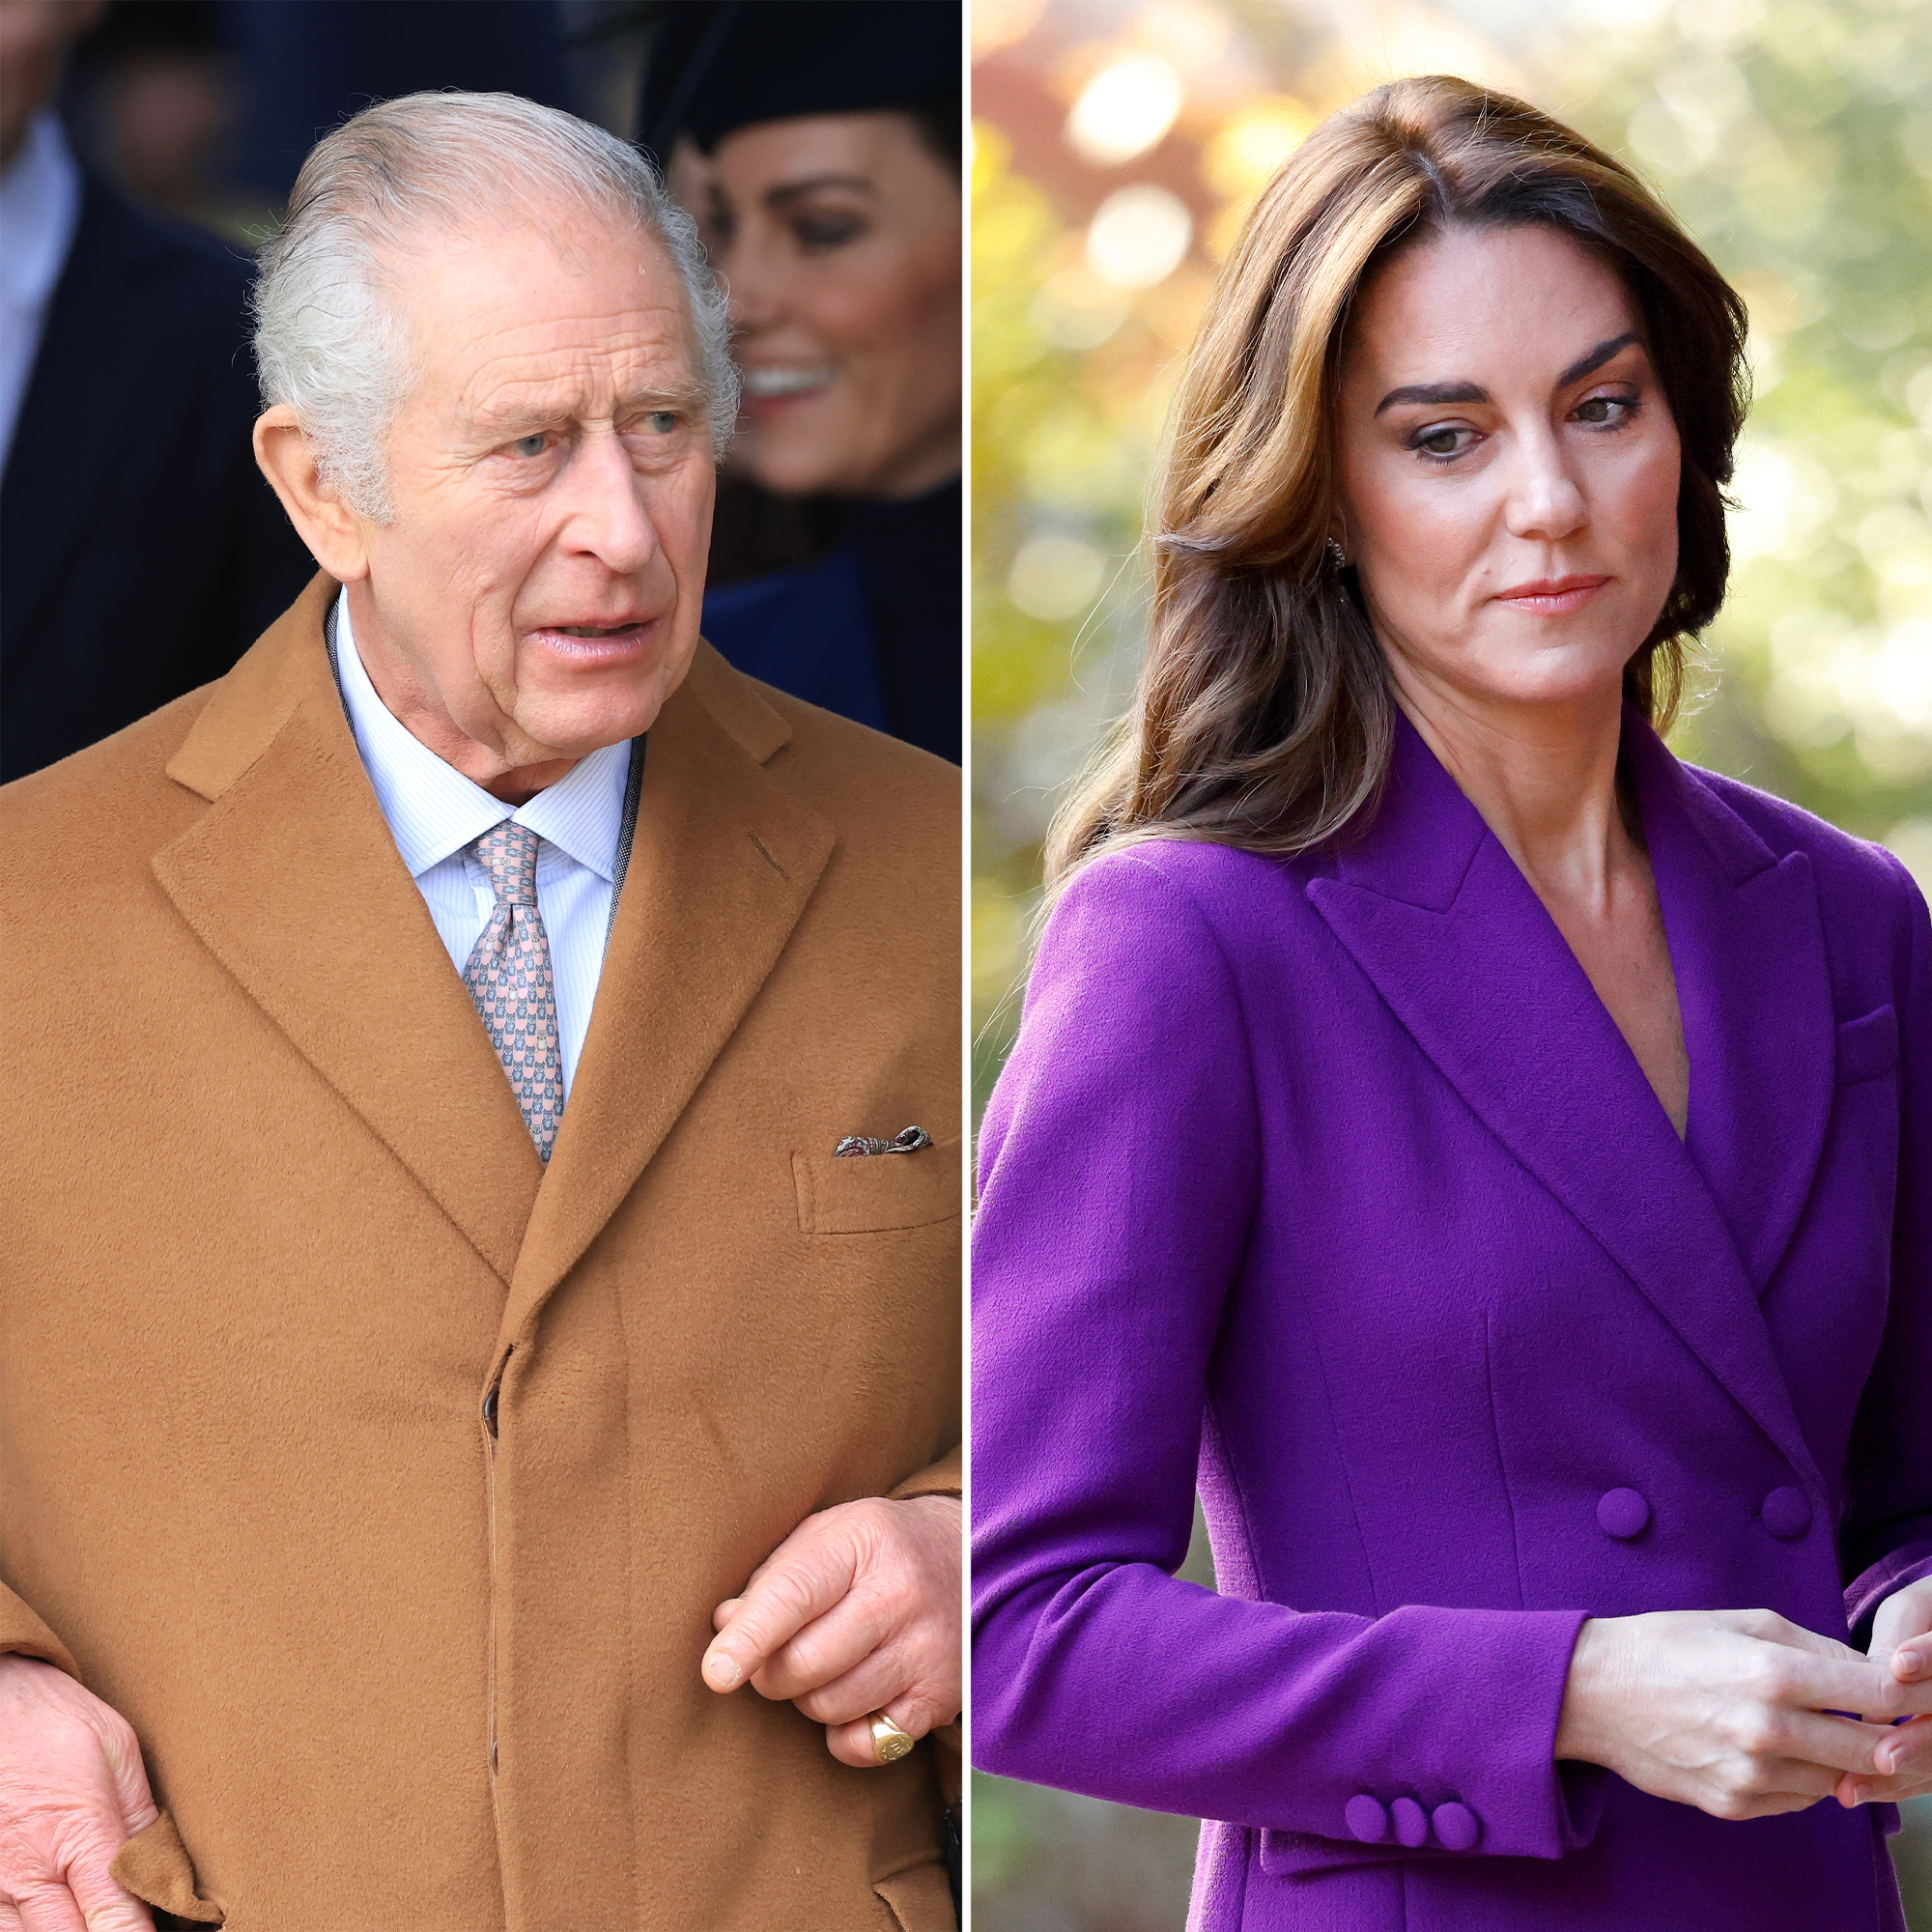 King Charles and Kate Middleton's Surgeries Spark Monarchy Concerns: Expert